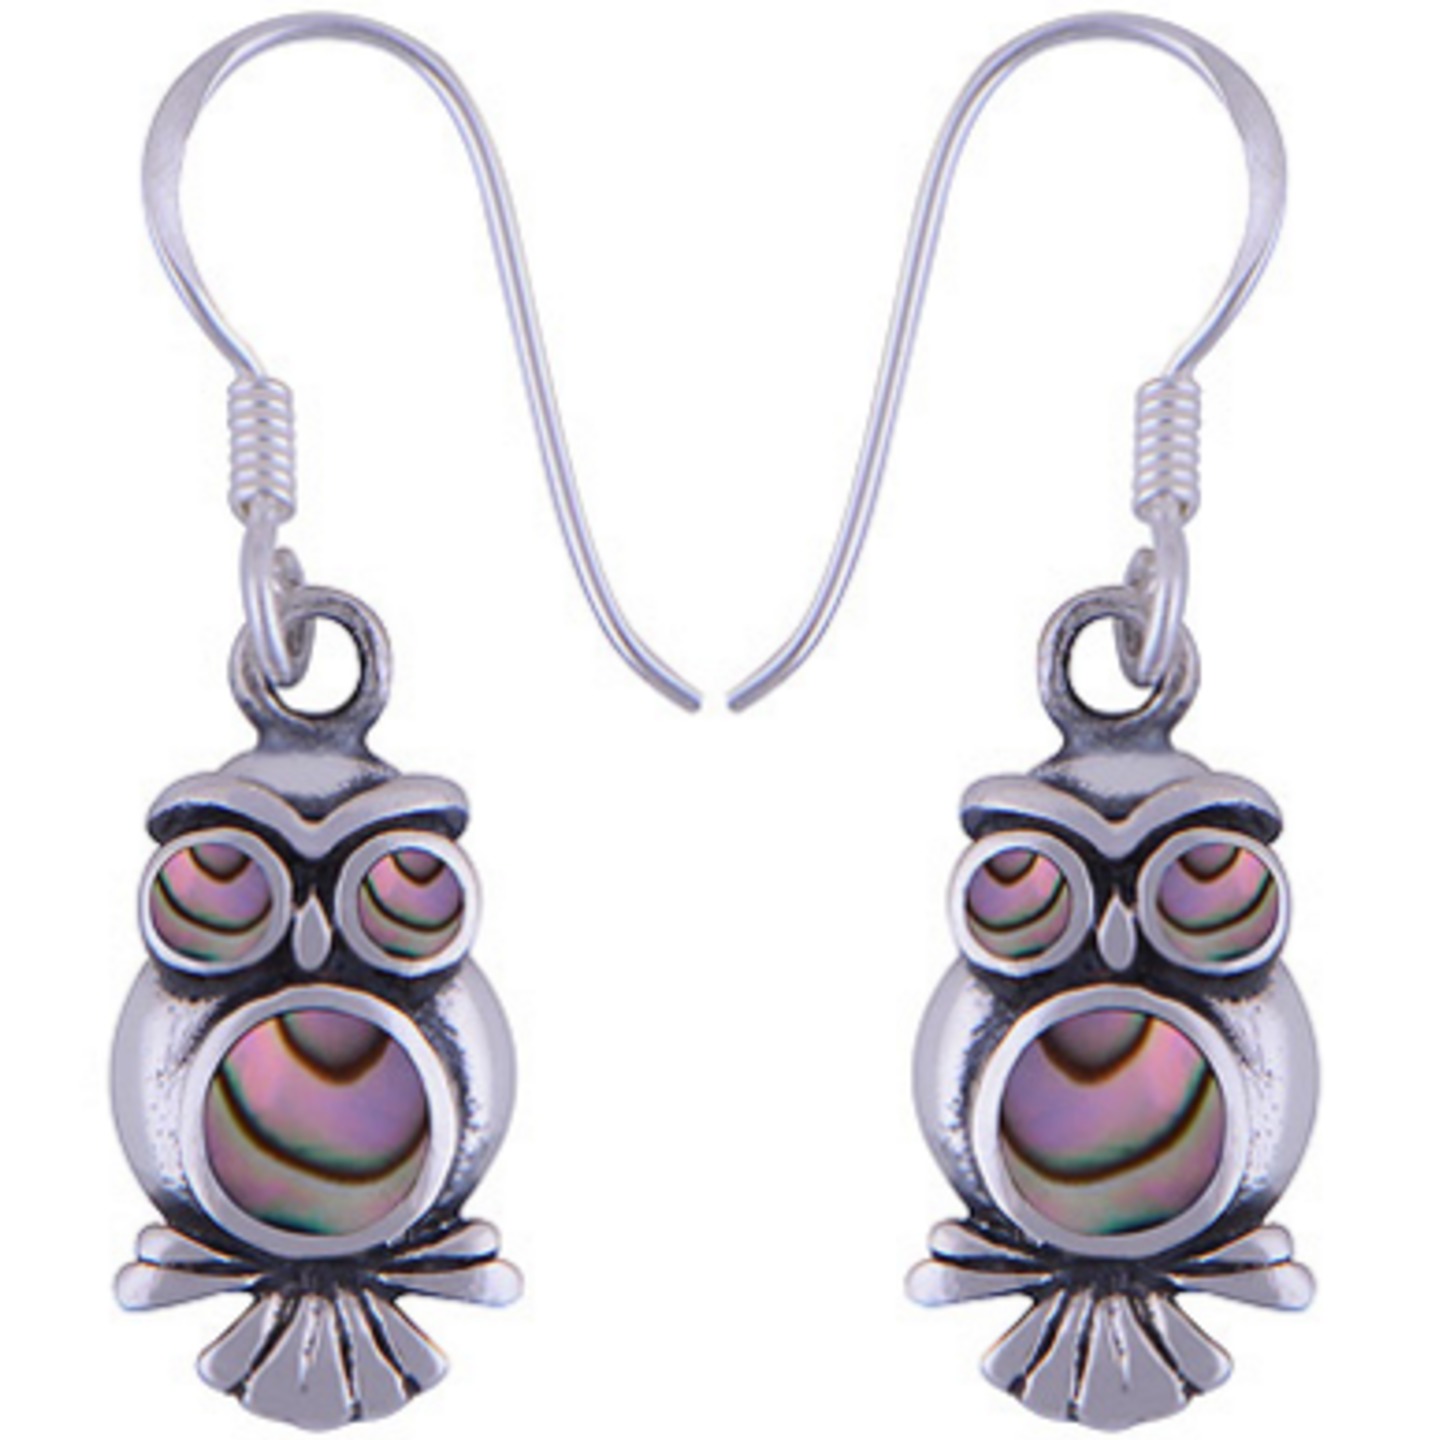 The Tranced Owl Silver Earring